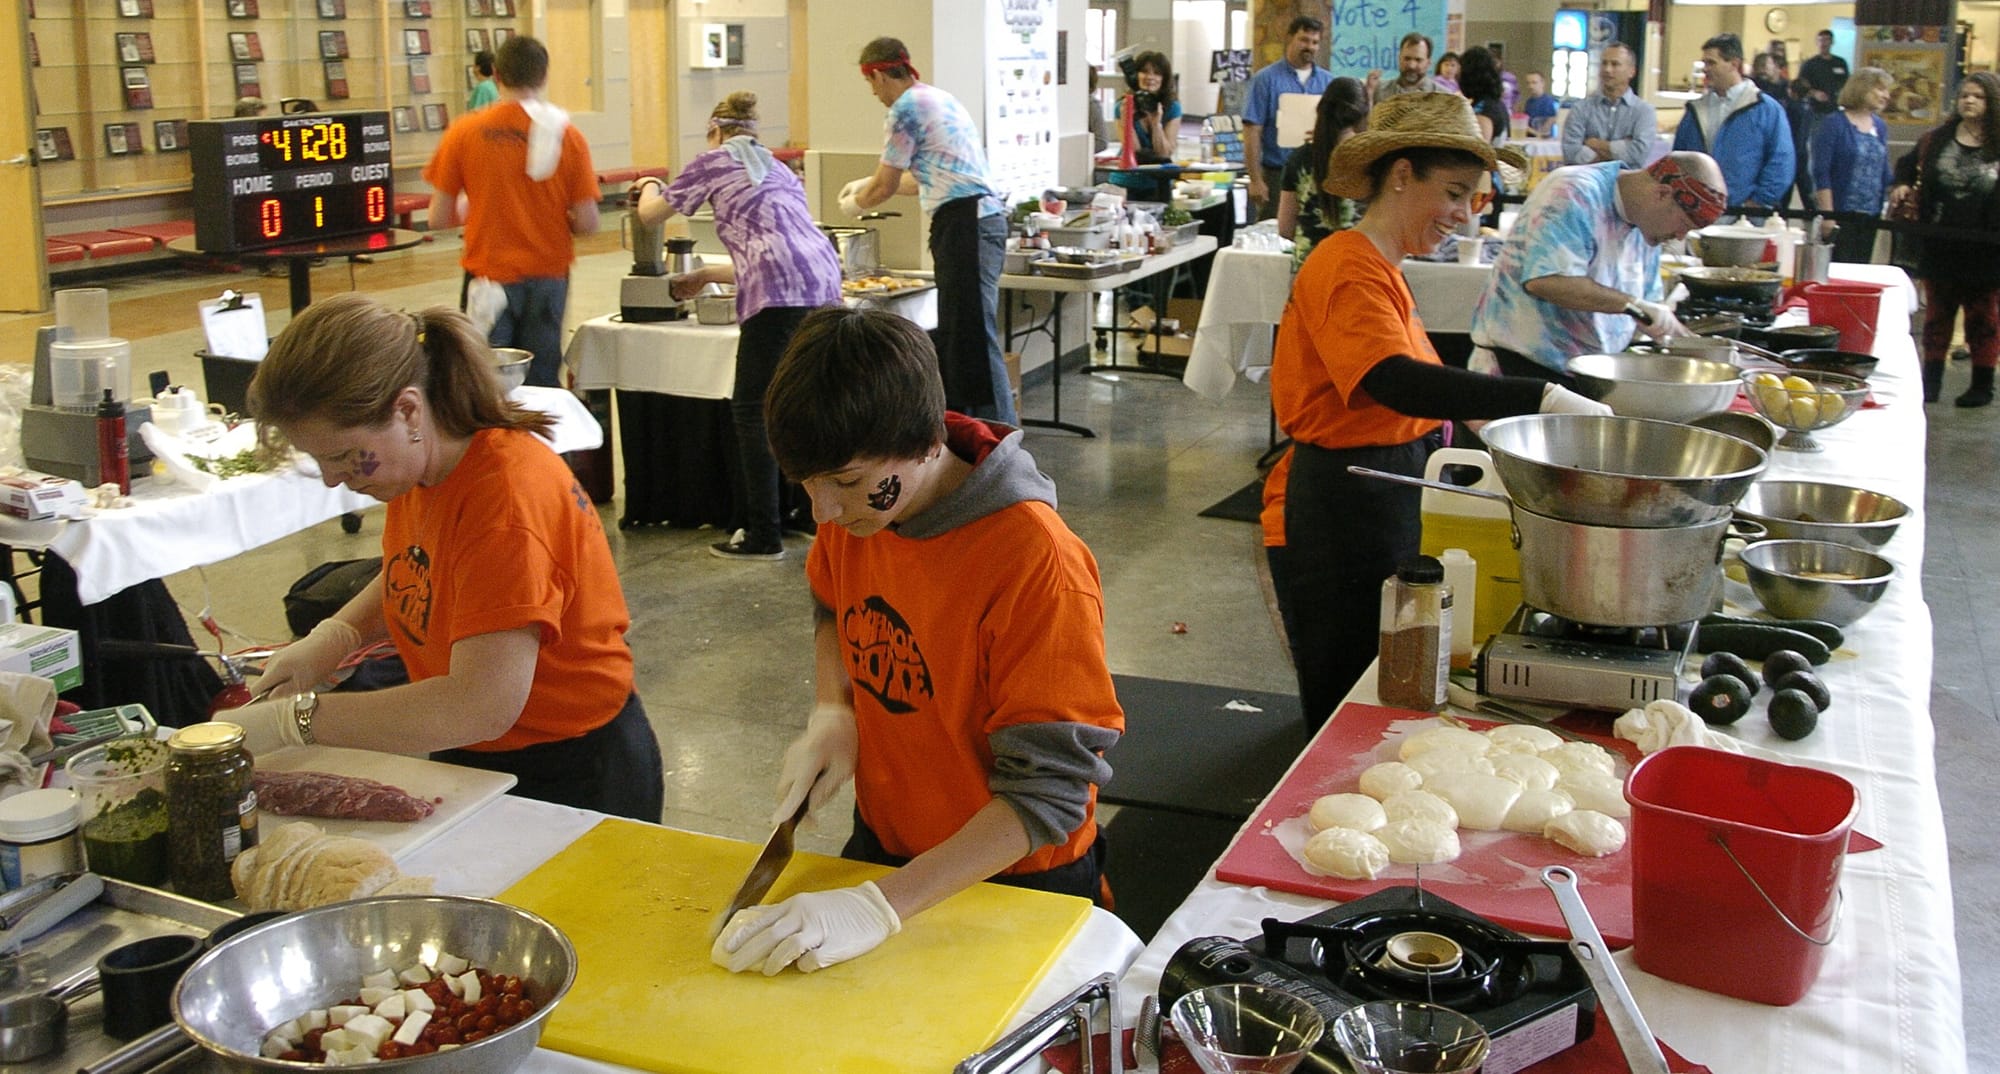 With the &quot;Iron Chef&quot; inspired cooking contest reaching its half-way mark on Sunday, teams &quot;School Thyme&quot; and &quot;Don't Mesa With the Best&quot; fight to make the most appetizing and creative dishes during the Taste of Camas event at Camas High School.